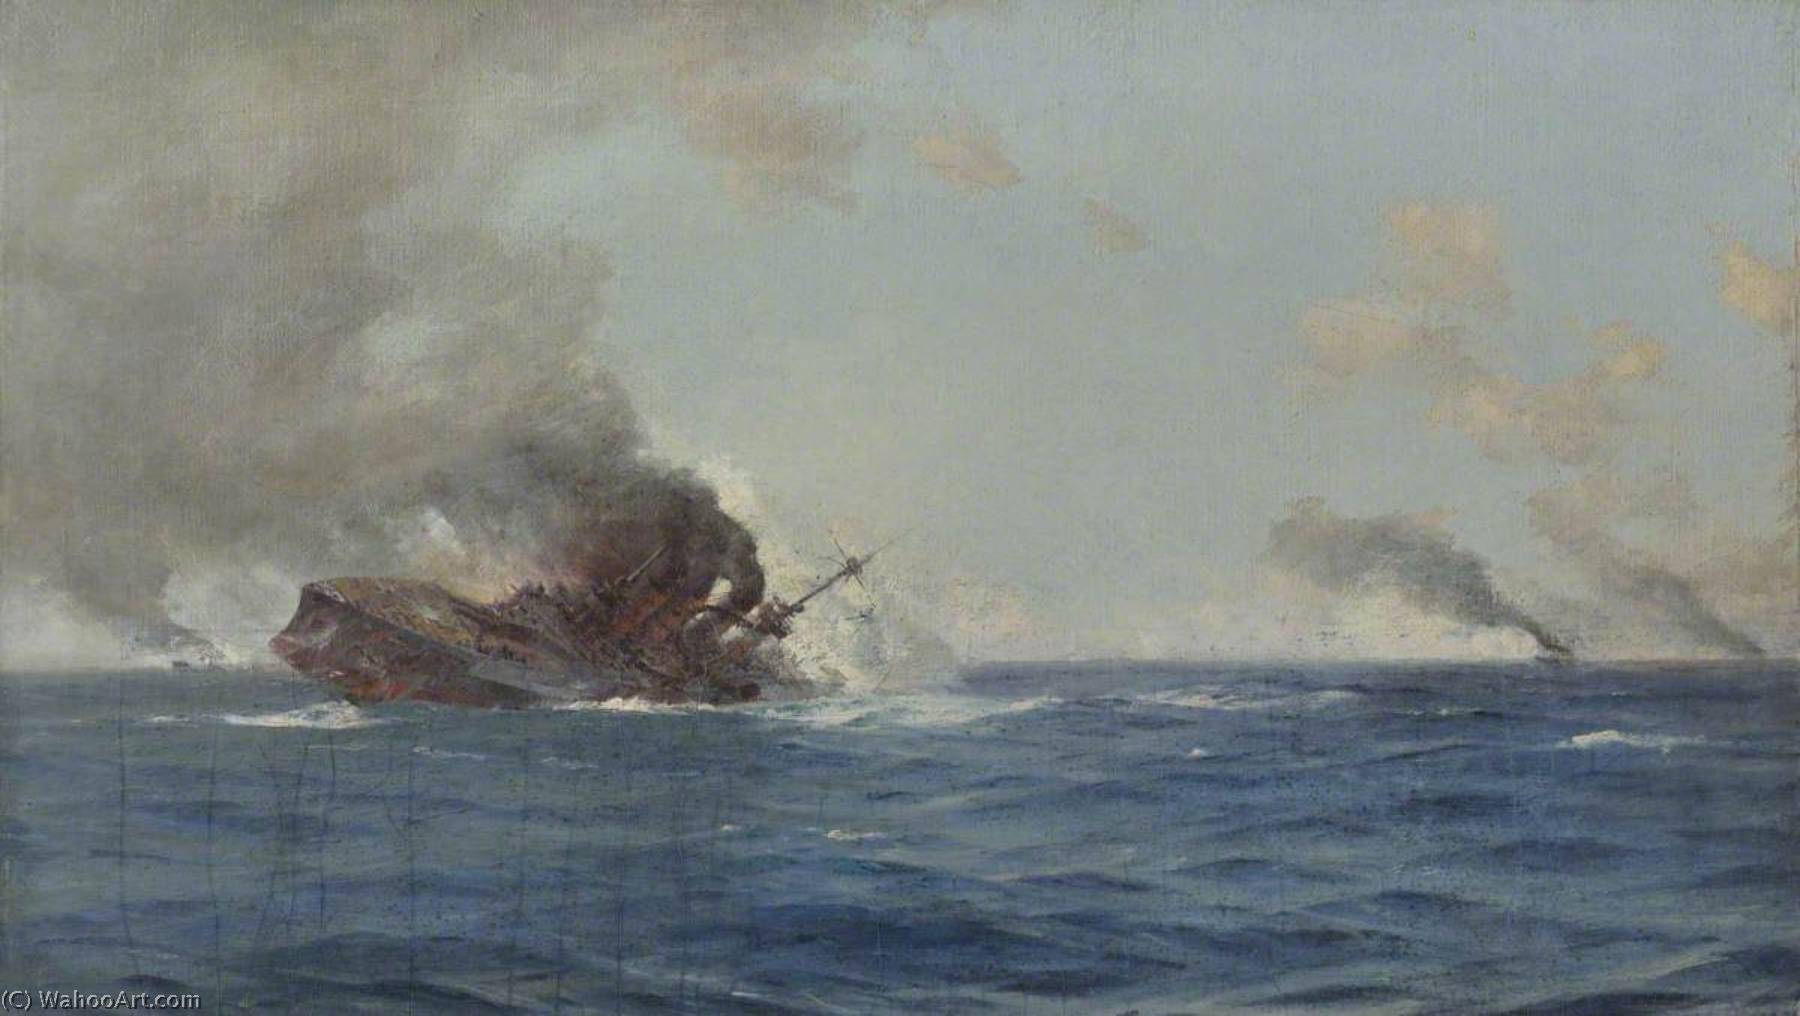 WikiOO.org - 백과 사전 - 회화, 삽화 Thomas Jacques Somerscales - Sinking of 'The Scharnhorst' at the Battle of the Falkland Islands, 8 December 1914